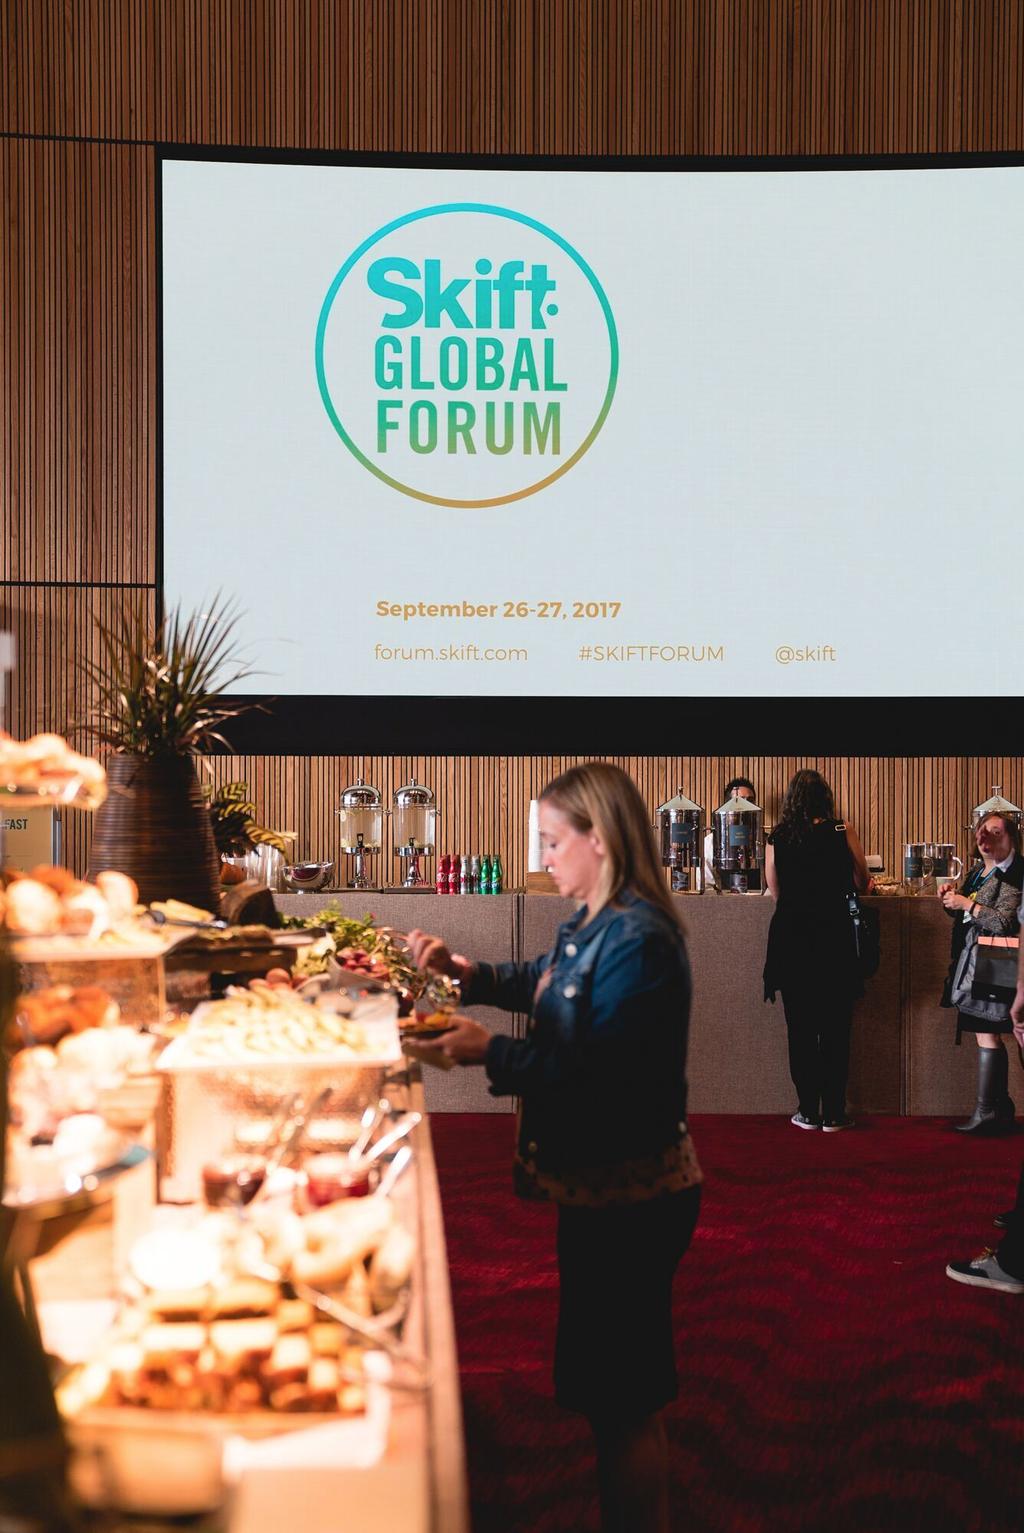 LUNCH SPONSOR Enable Skift Forum Europe attendees to connect over lunch during afternoon networking break.